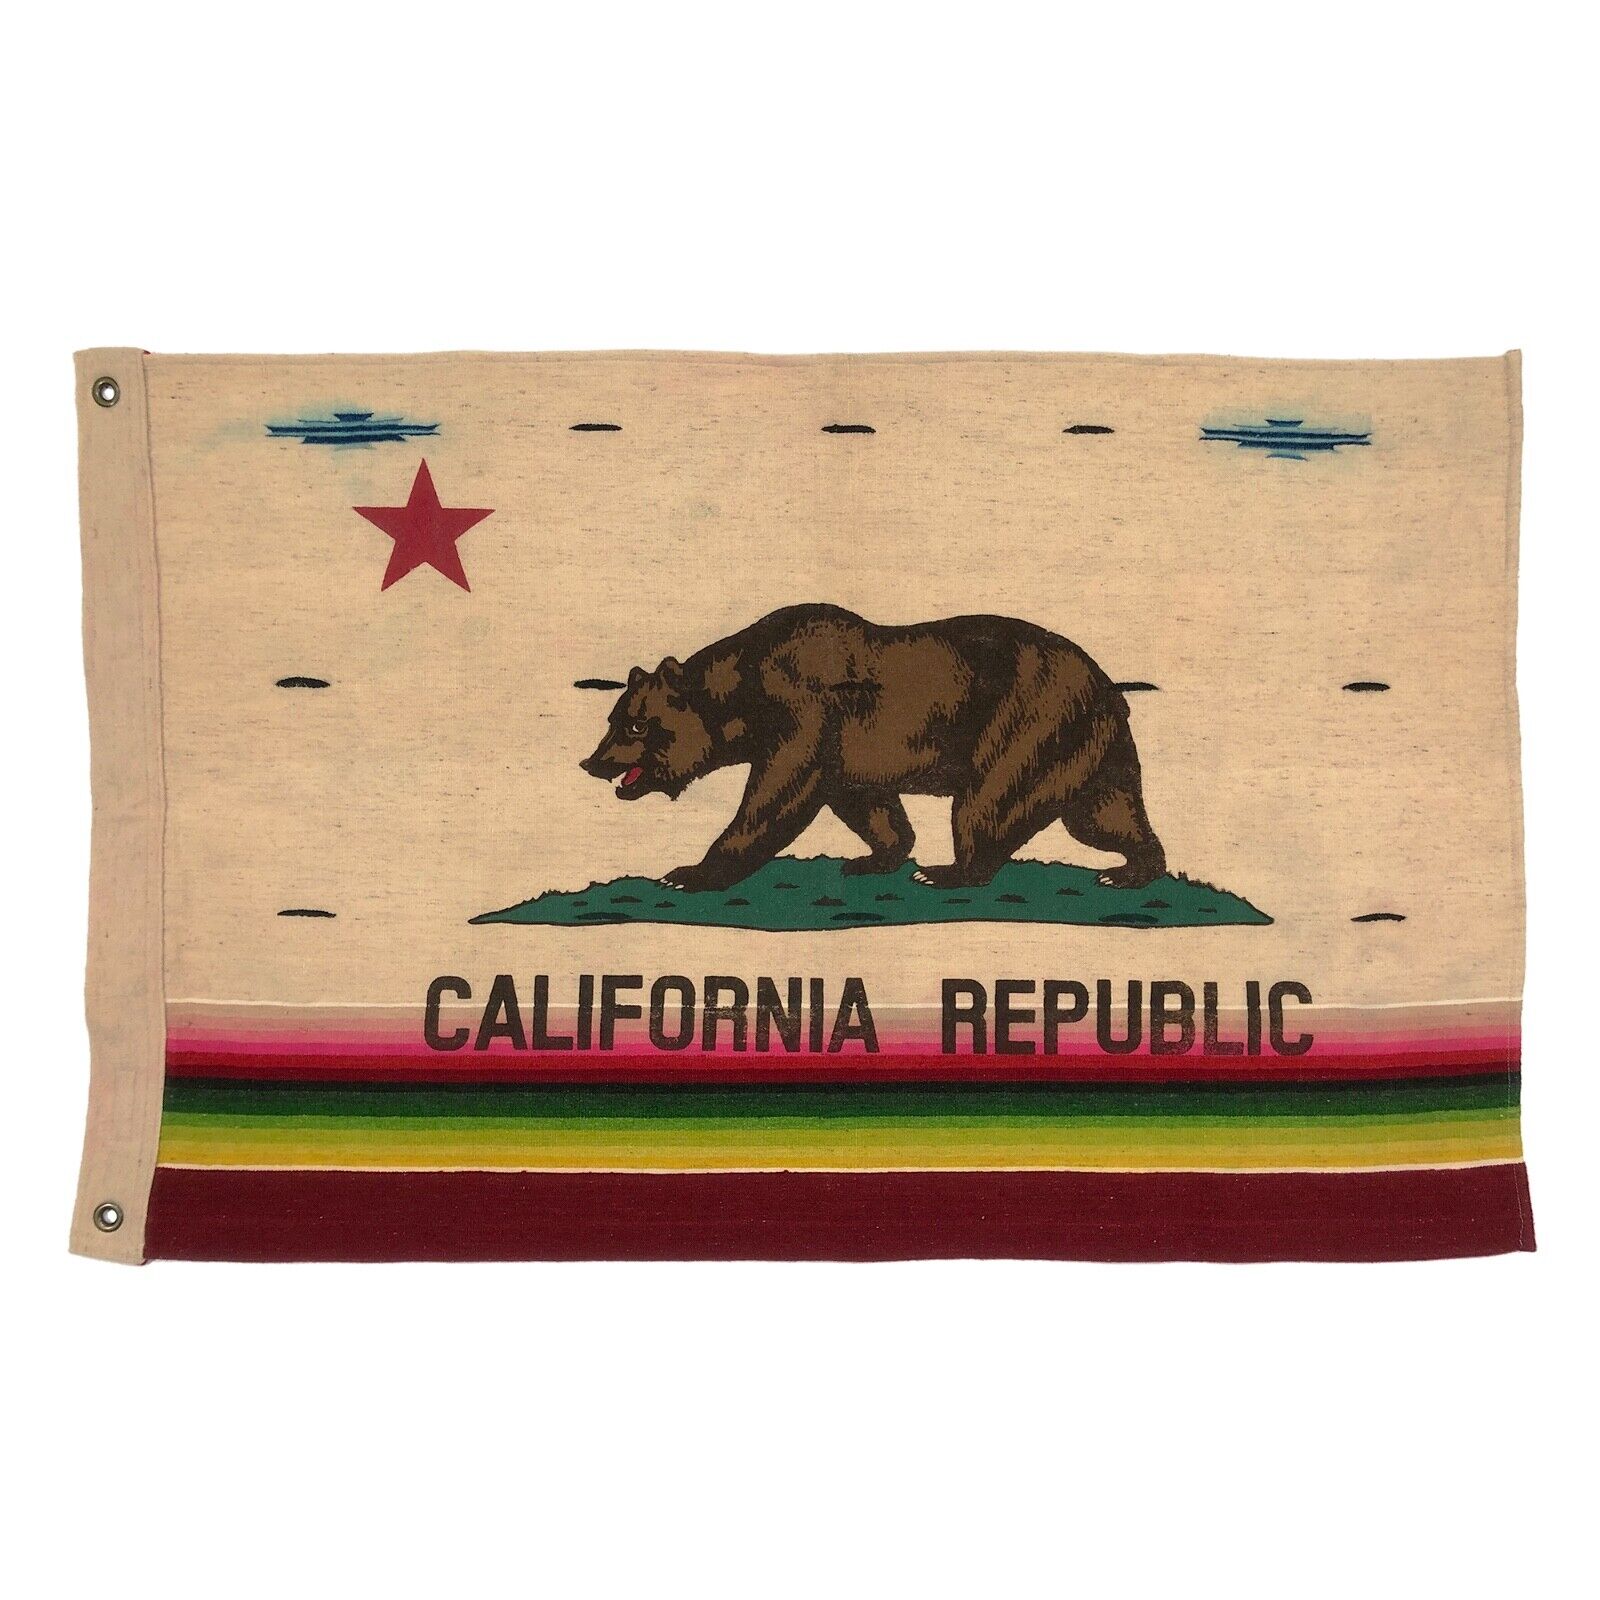 California Republic Bear Flag with Vintage Wool Cloth Old Mexican Serape Textile